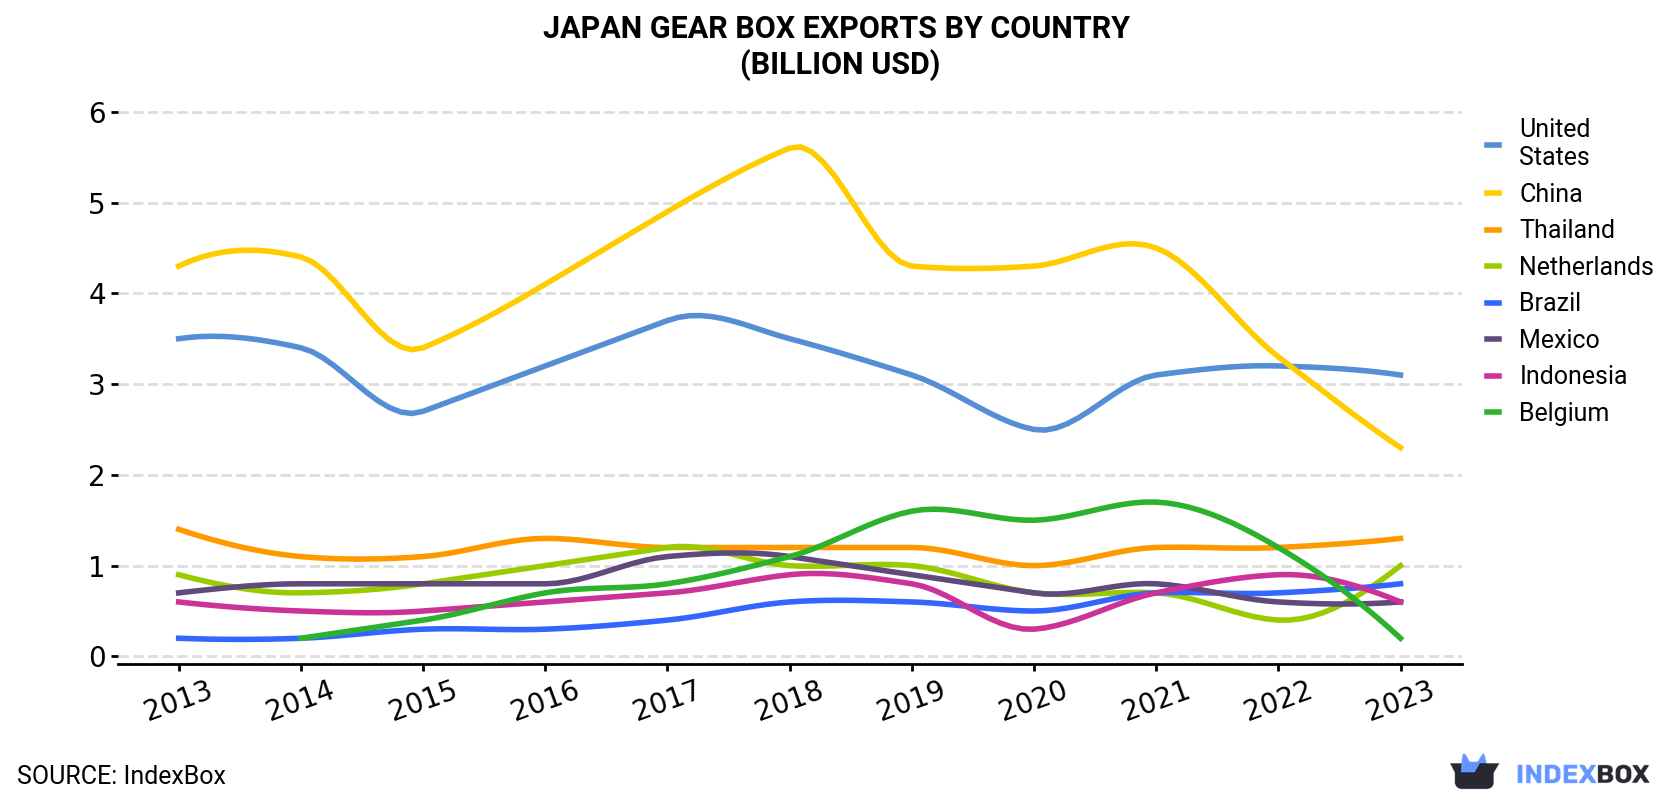 Japan Gear Box Exports By Country (Billion USD)